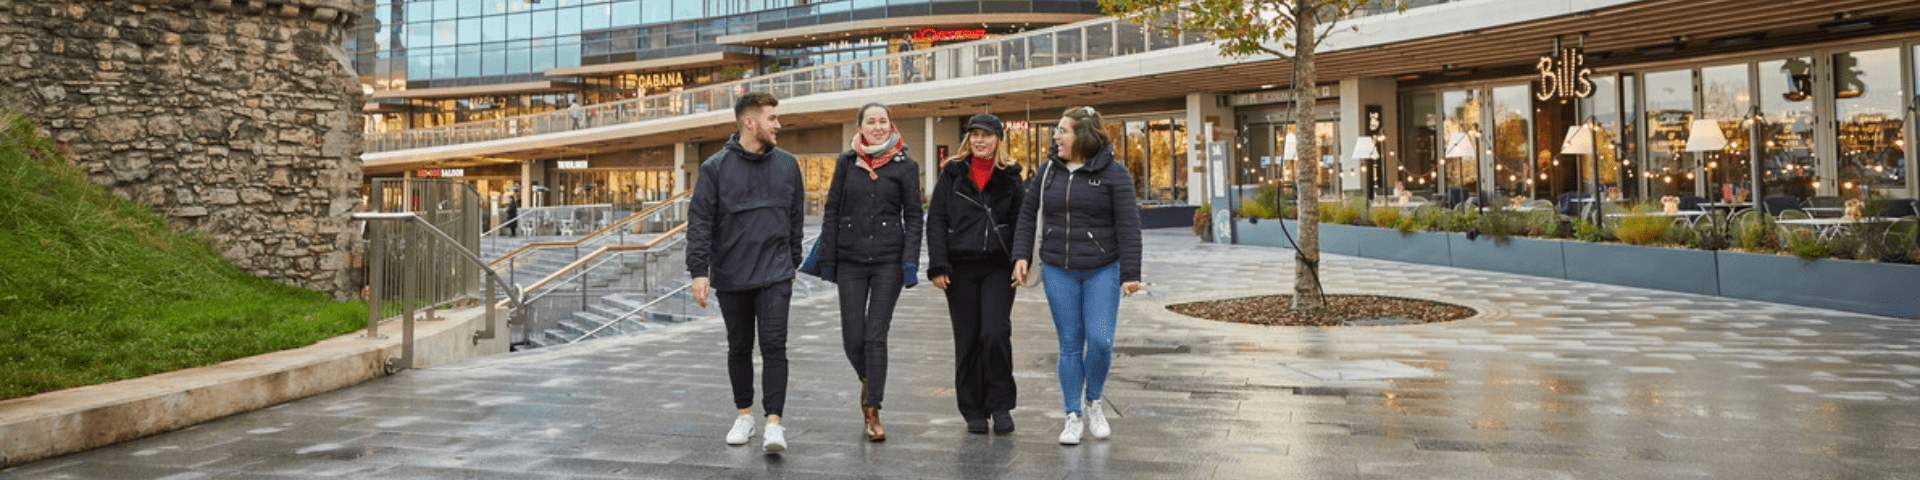 Four students walk through Southampton by the Showcase cinema and West Quay